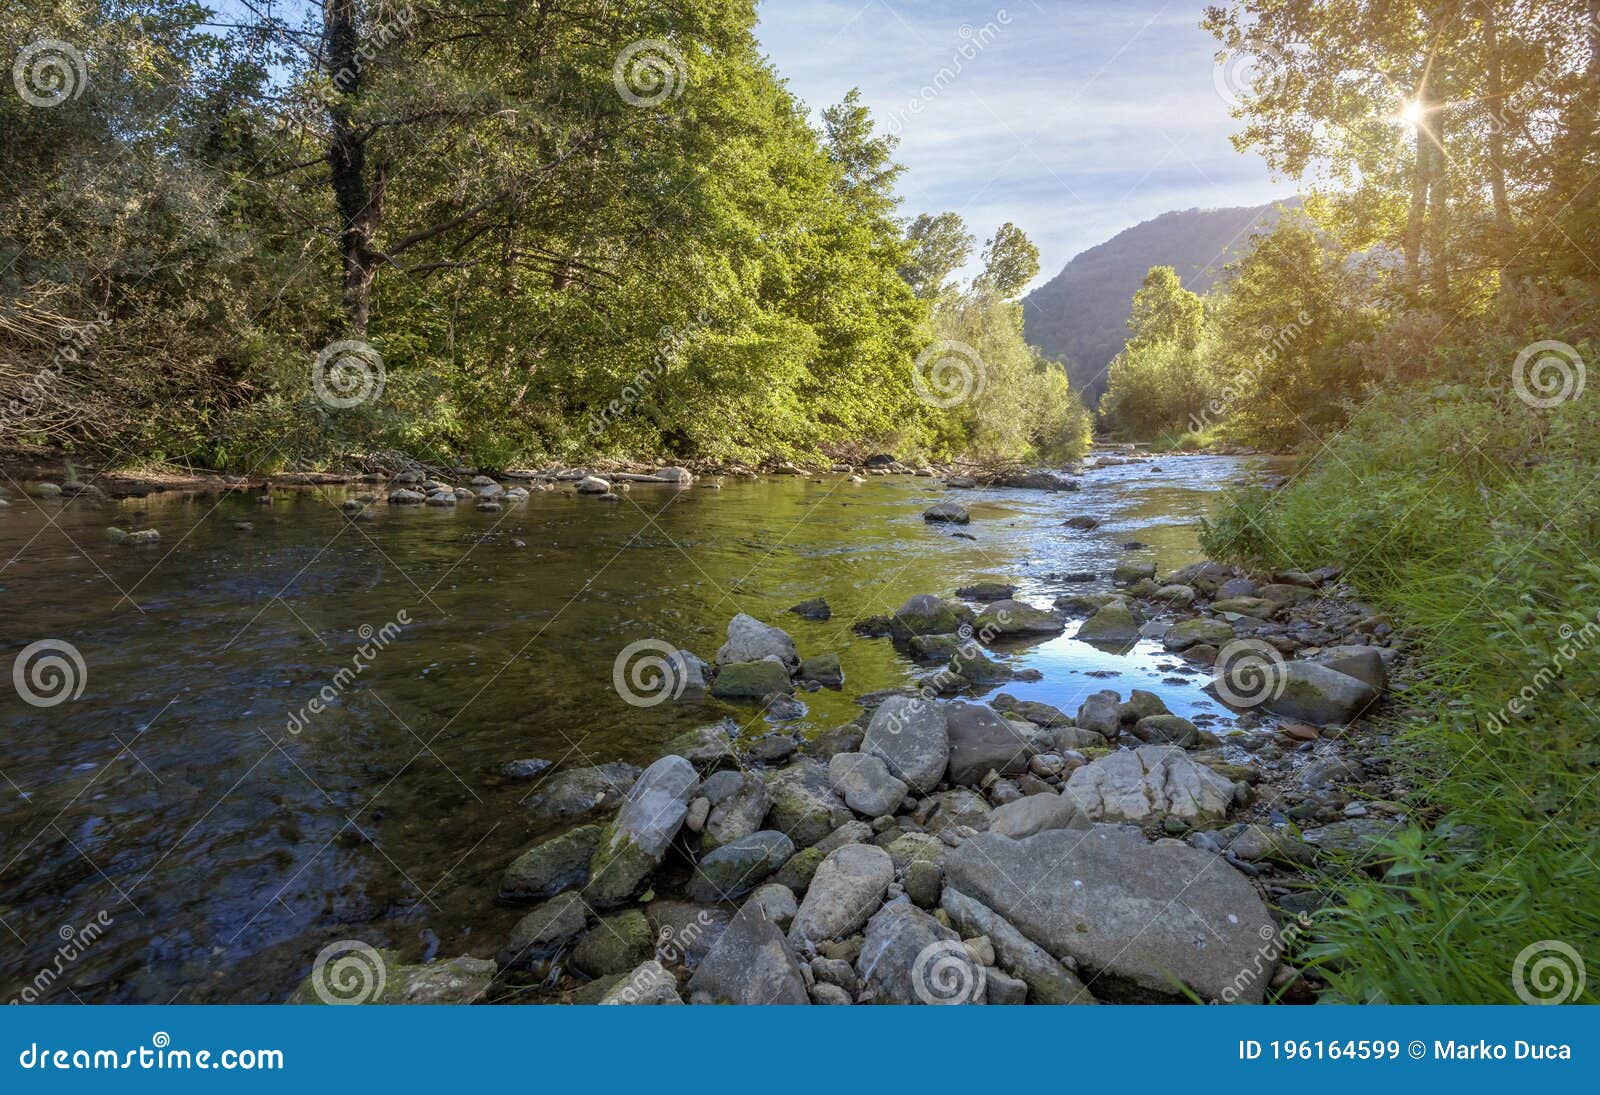 River Runs Along With Several Rocks And Stones Background, River Rock  Landscape Picture Background Image And Wallpaper for Free Download